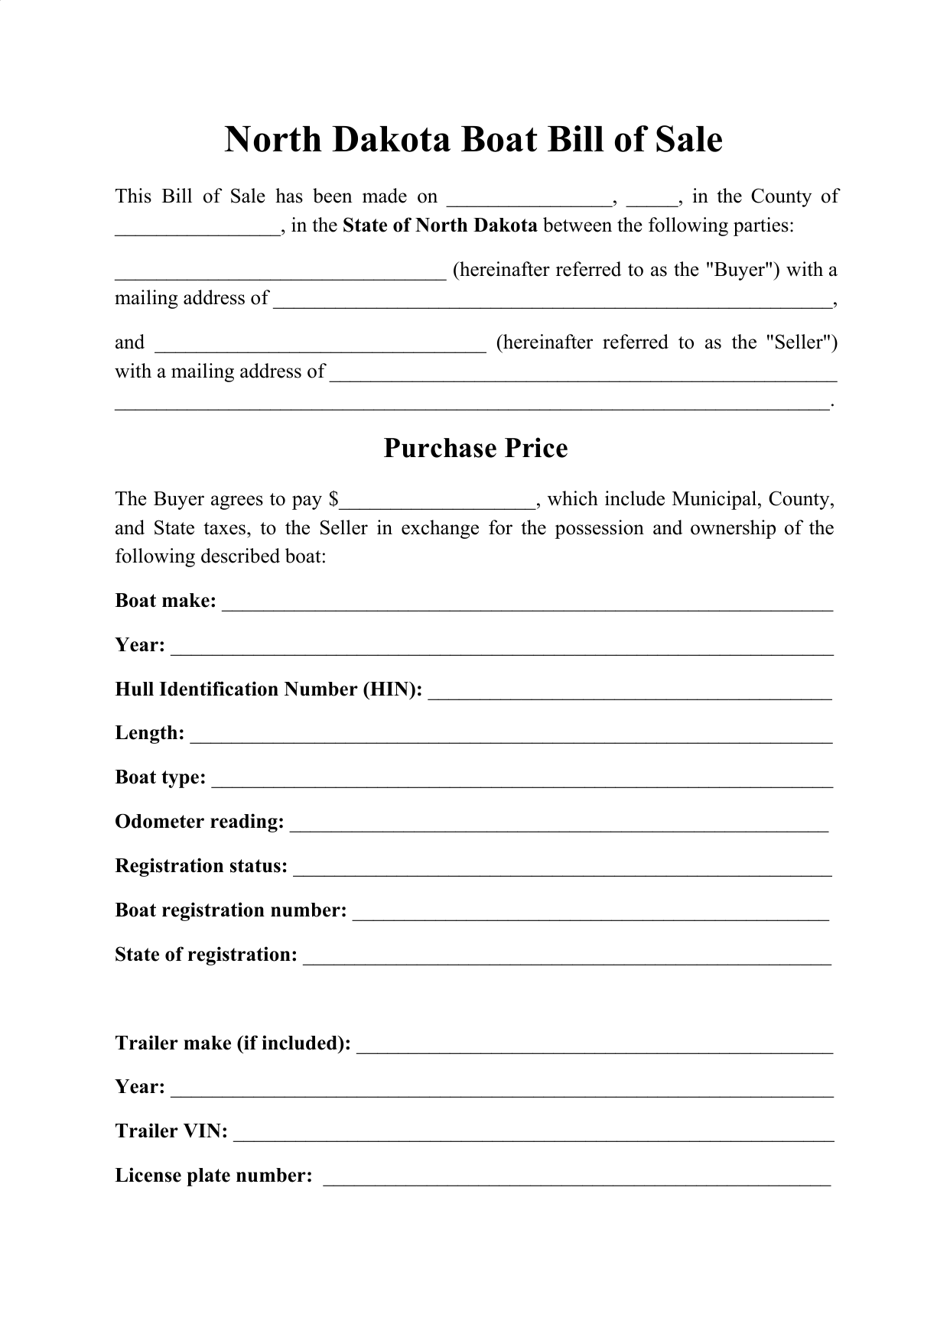 north-dakota-boat-bill-of-sale-form-fill-out-sign-online-and